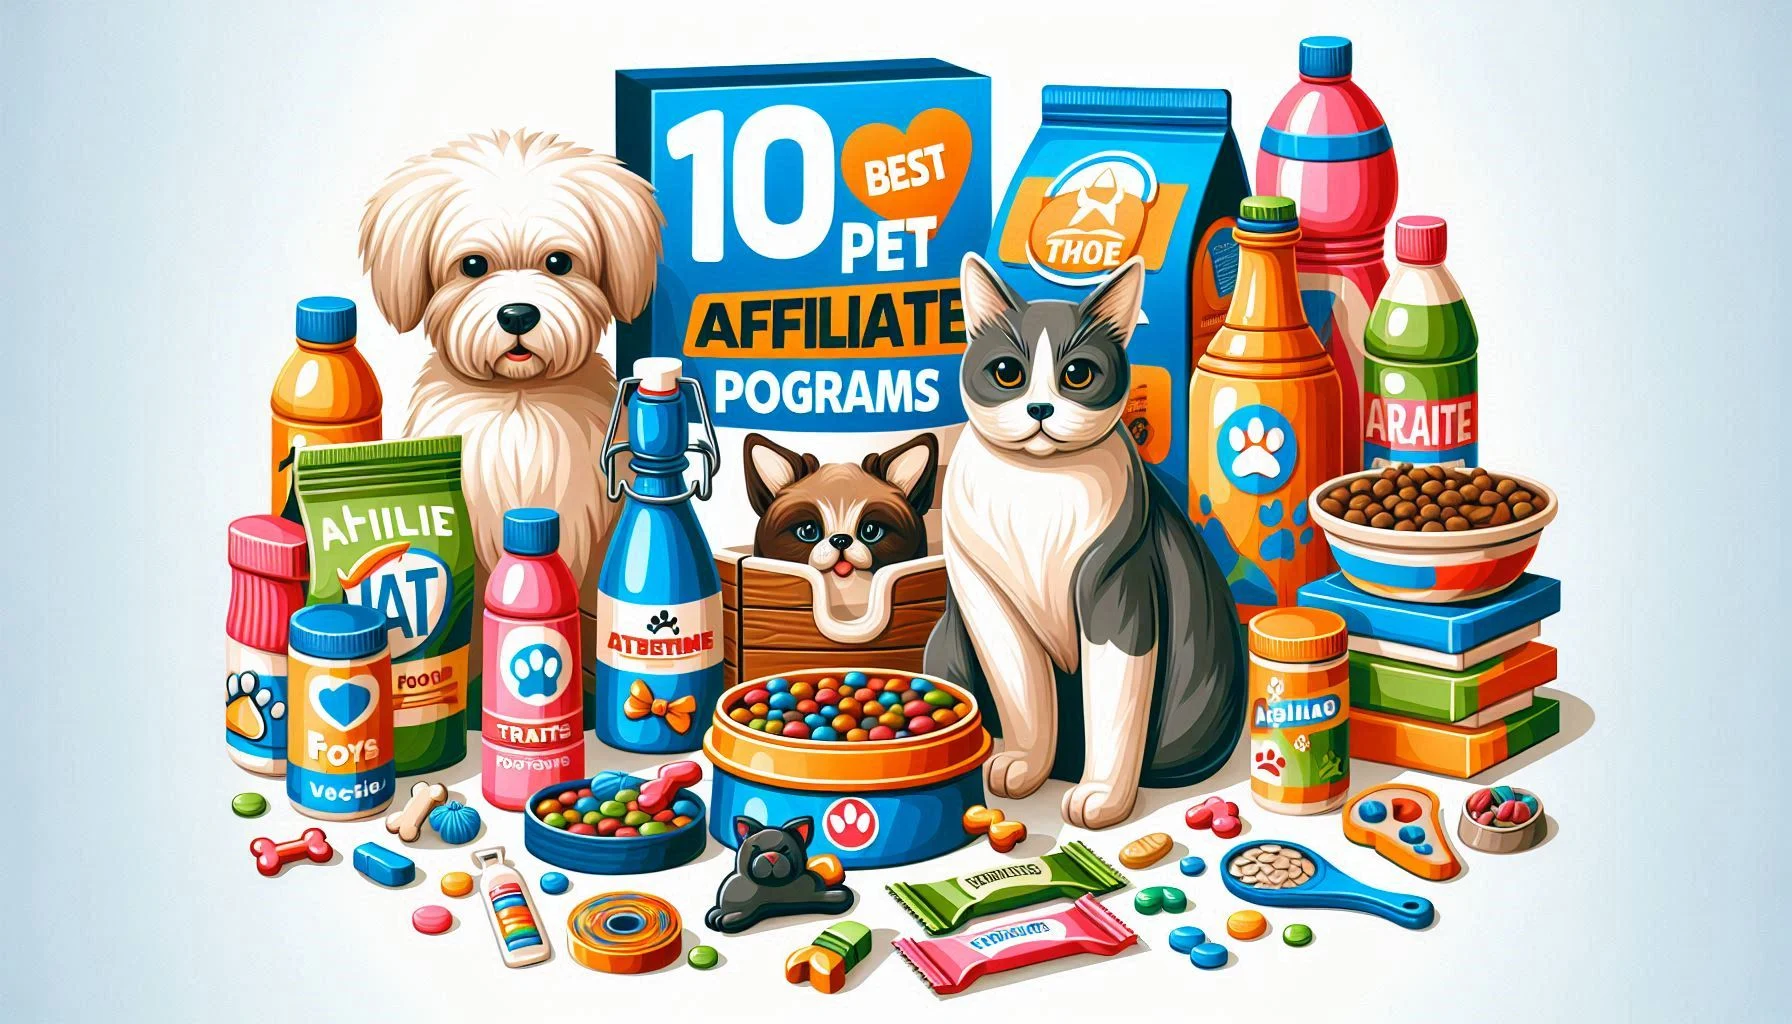 An engaging, high-quality photo featuring a variety of popular pet products from the mentioned affiliate programs, such as pet food, treats, toys, and accessories. The products should be attractively arranged on a clean, white background, with a text overlay that reads 10 Best Pet Affiliate Programs. The image should convey a sense of quality, variety, and the potential for earning through pet affiliate marketing.